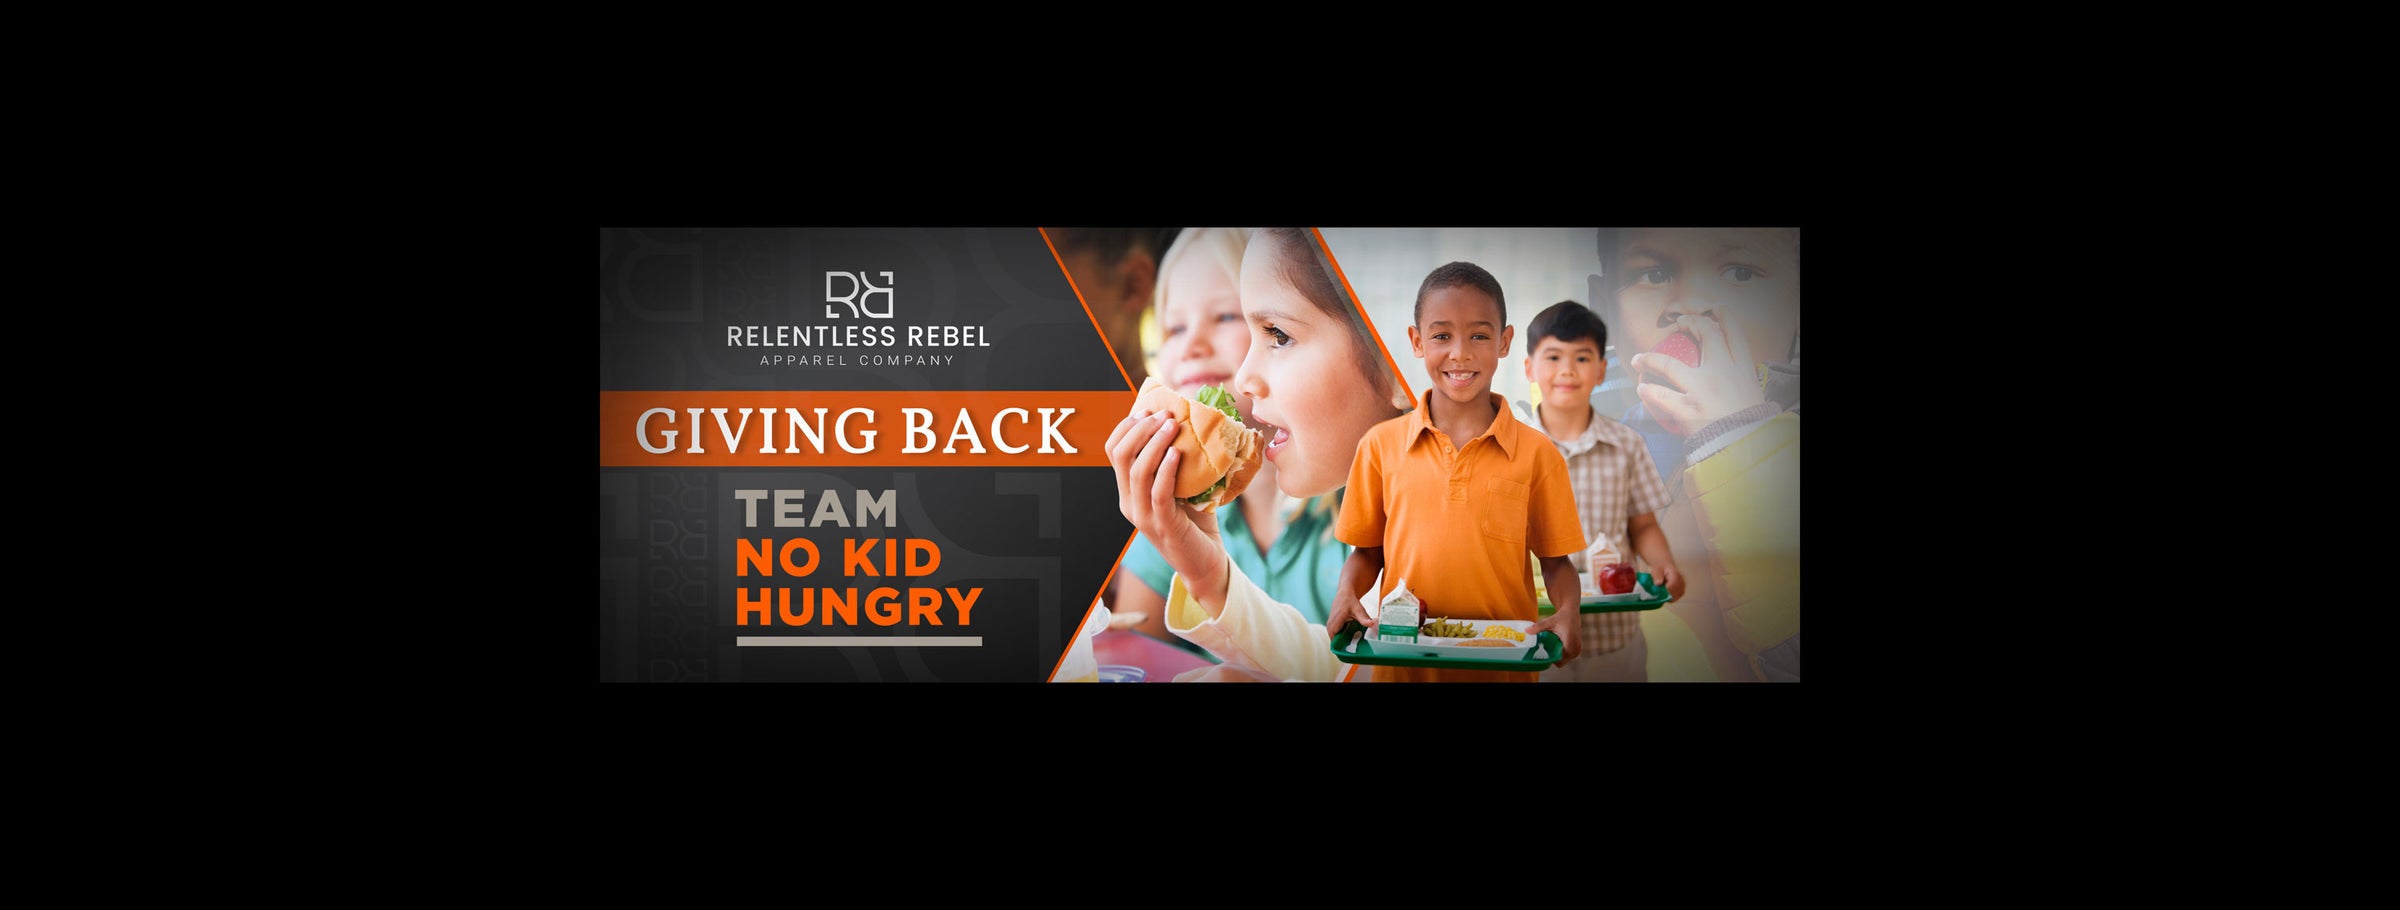 No Kid Hungry graphic